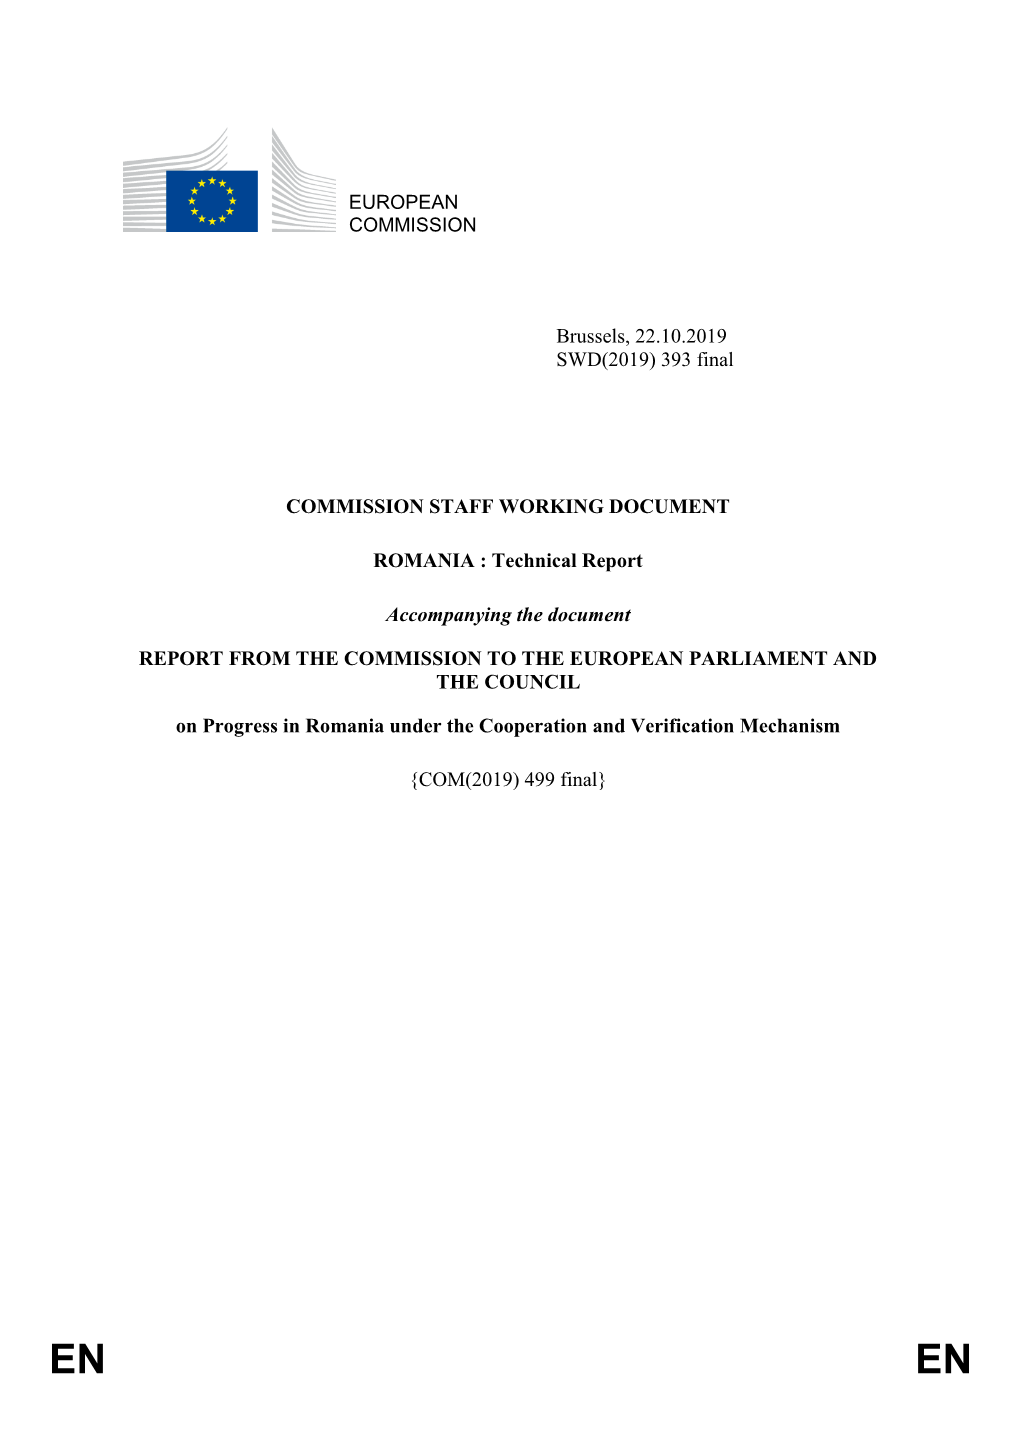 EUROPEAN COMMISSION Brussels, 22.10.2019 SWD(2019) 393 Final COMMISSION STAFF WORKING DOCUMENT ROMANIA : Technical Report Accom